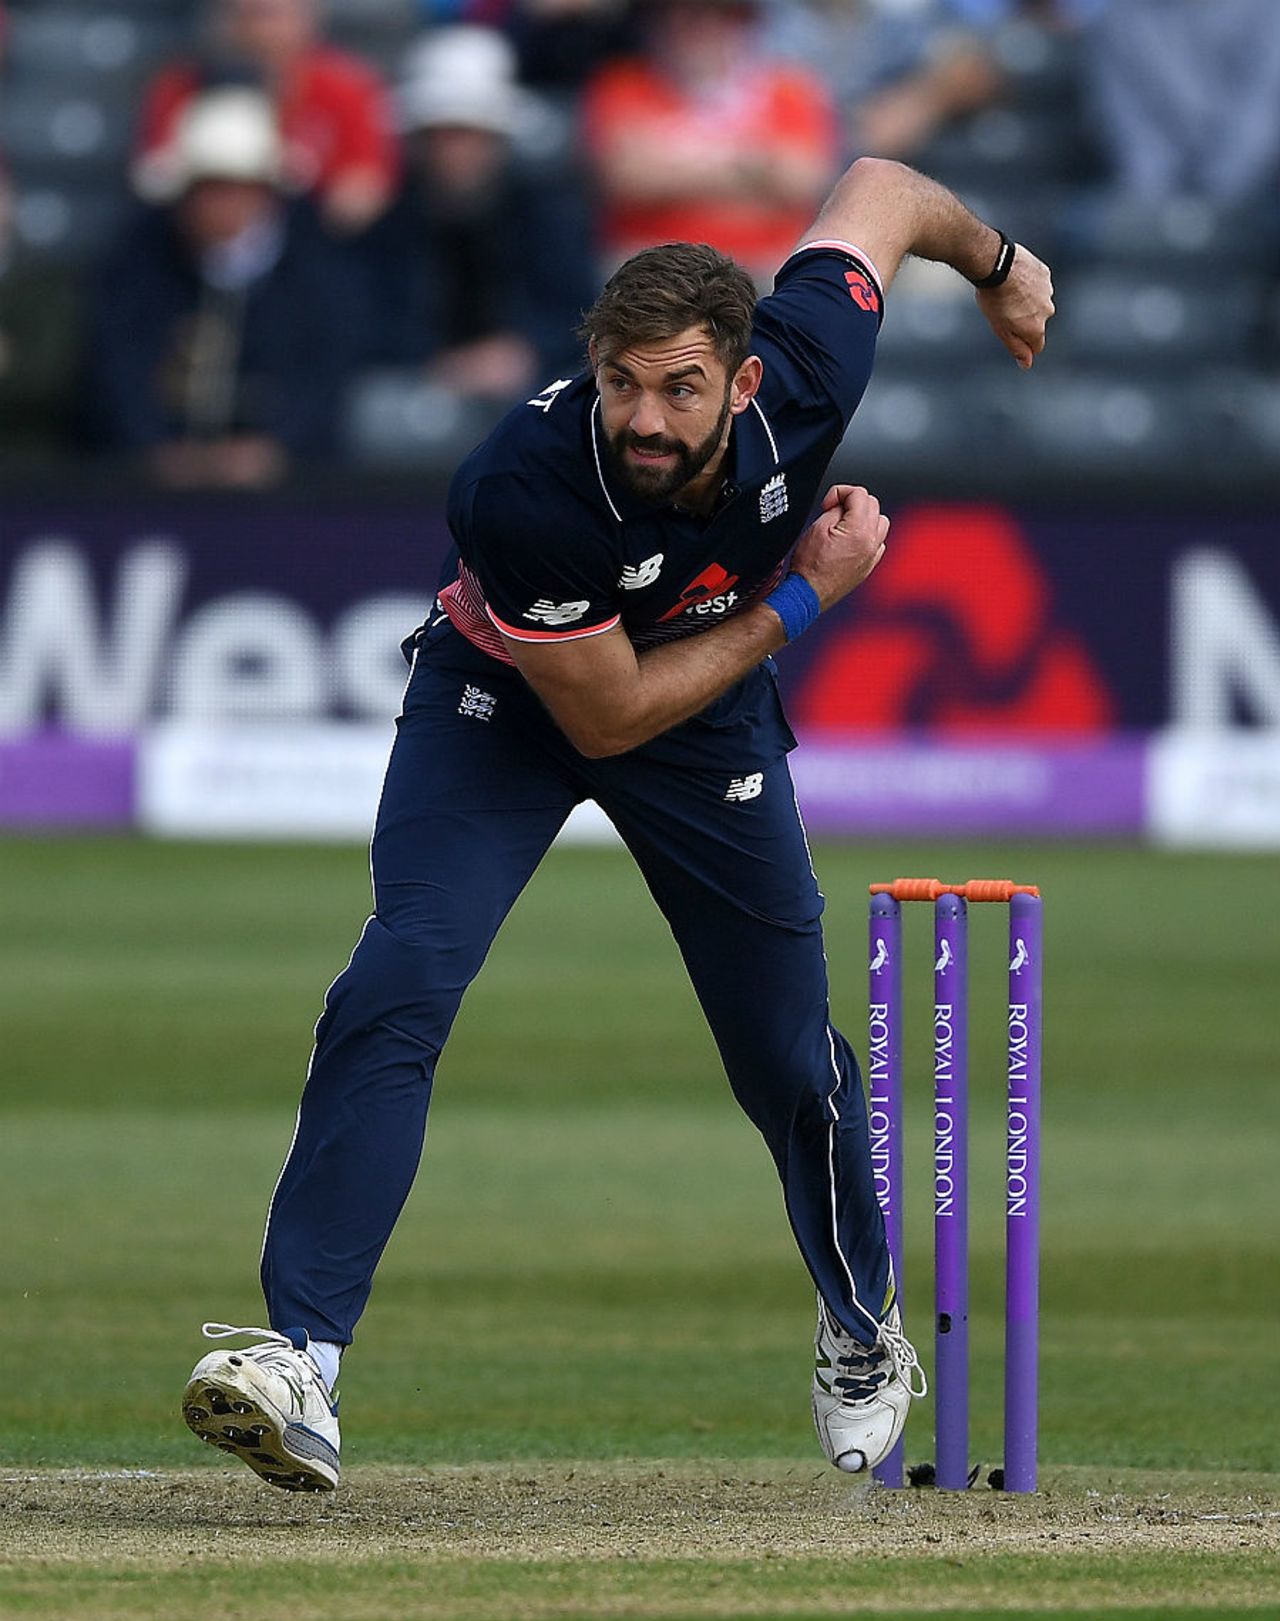 Liam Plunkett was playing in his 50th ODI, 11 years after his first, England v Ireland, 1st ODI, Bristol, May 5, 2017